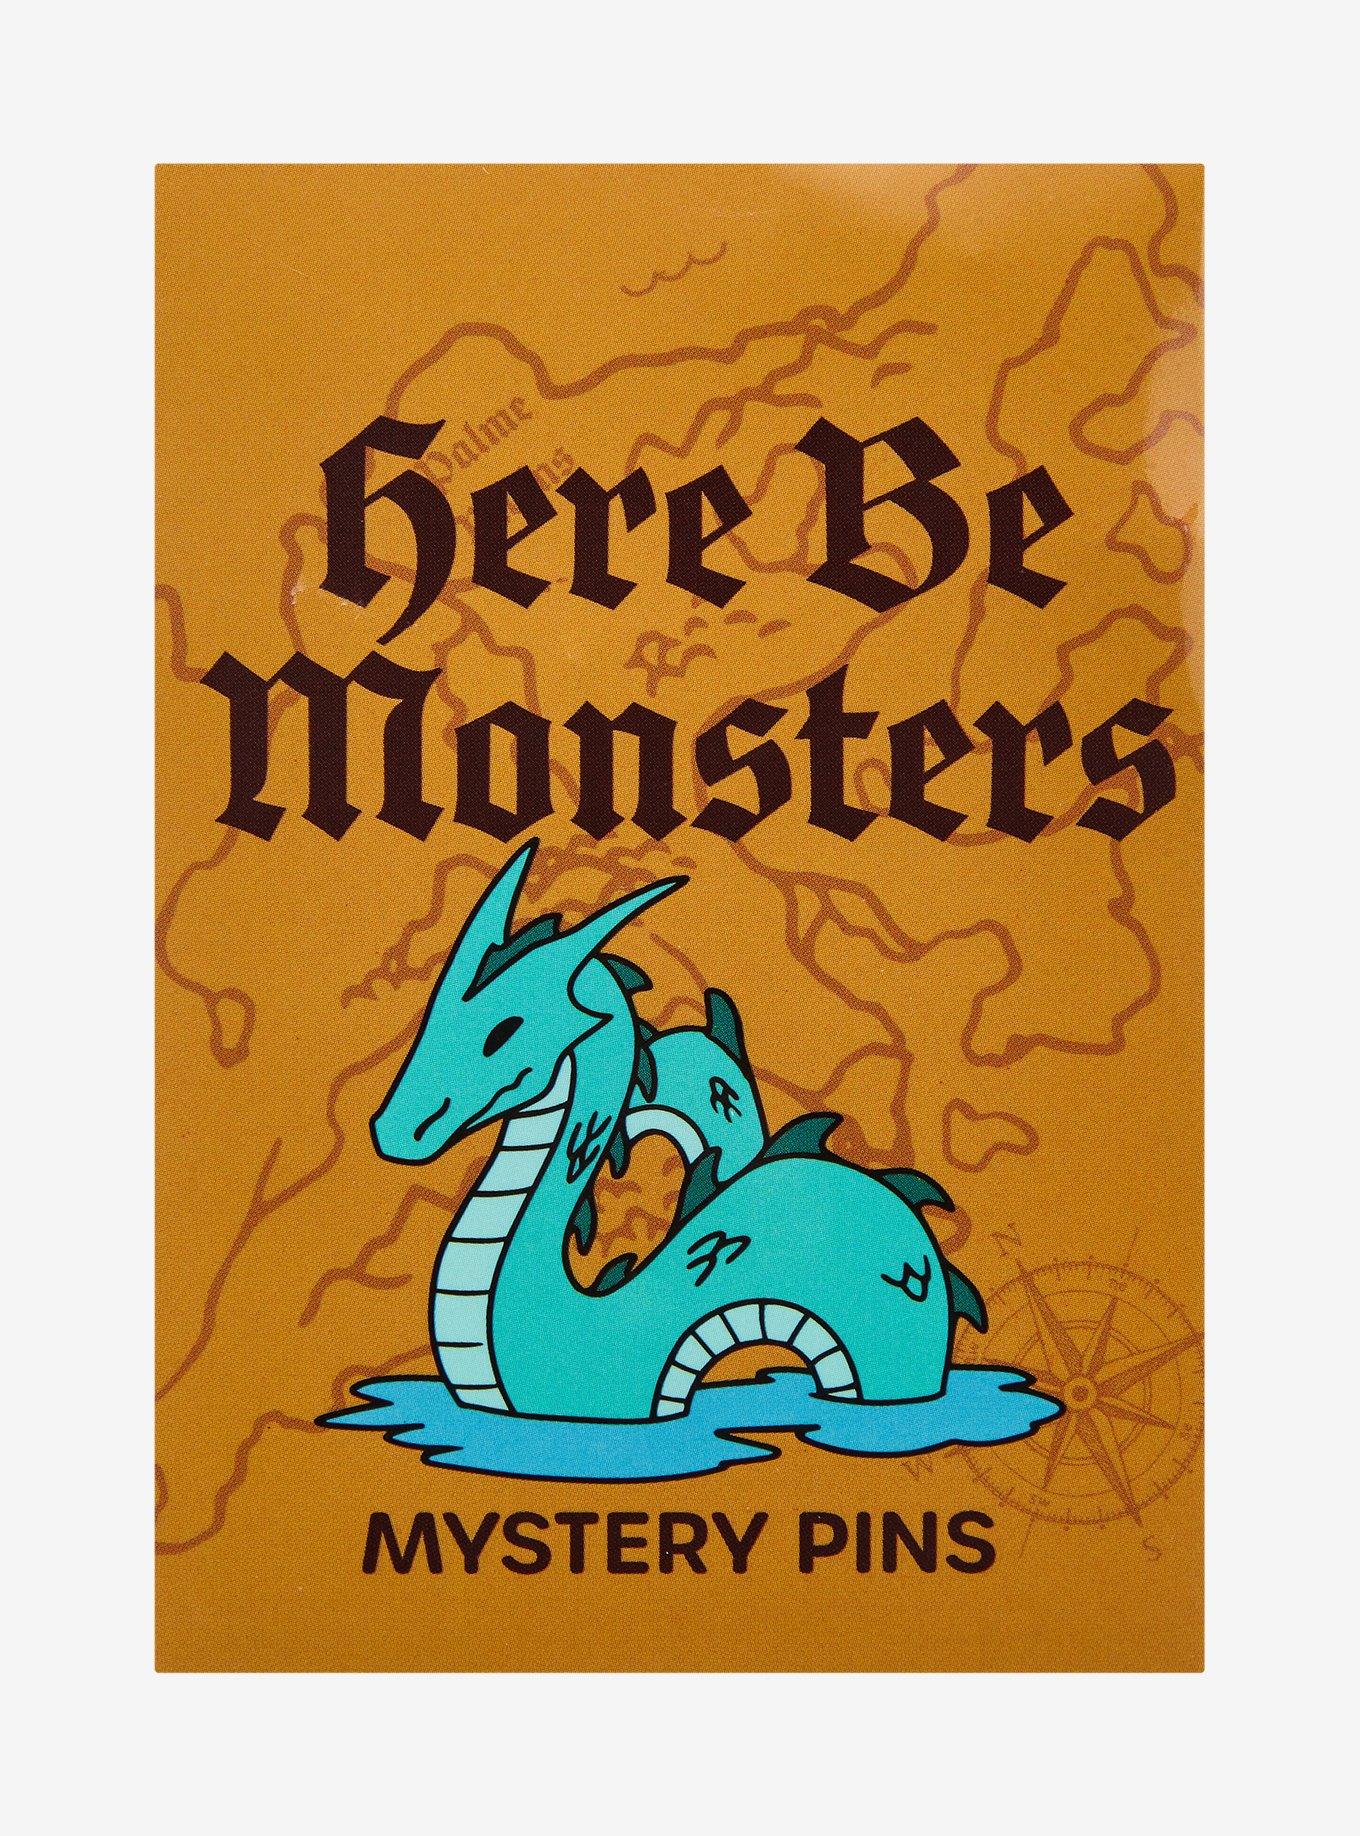 Mythical Creatures Blind Box Enamel Pin